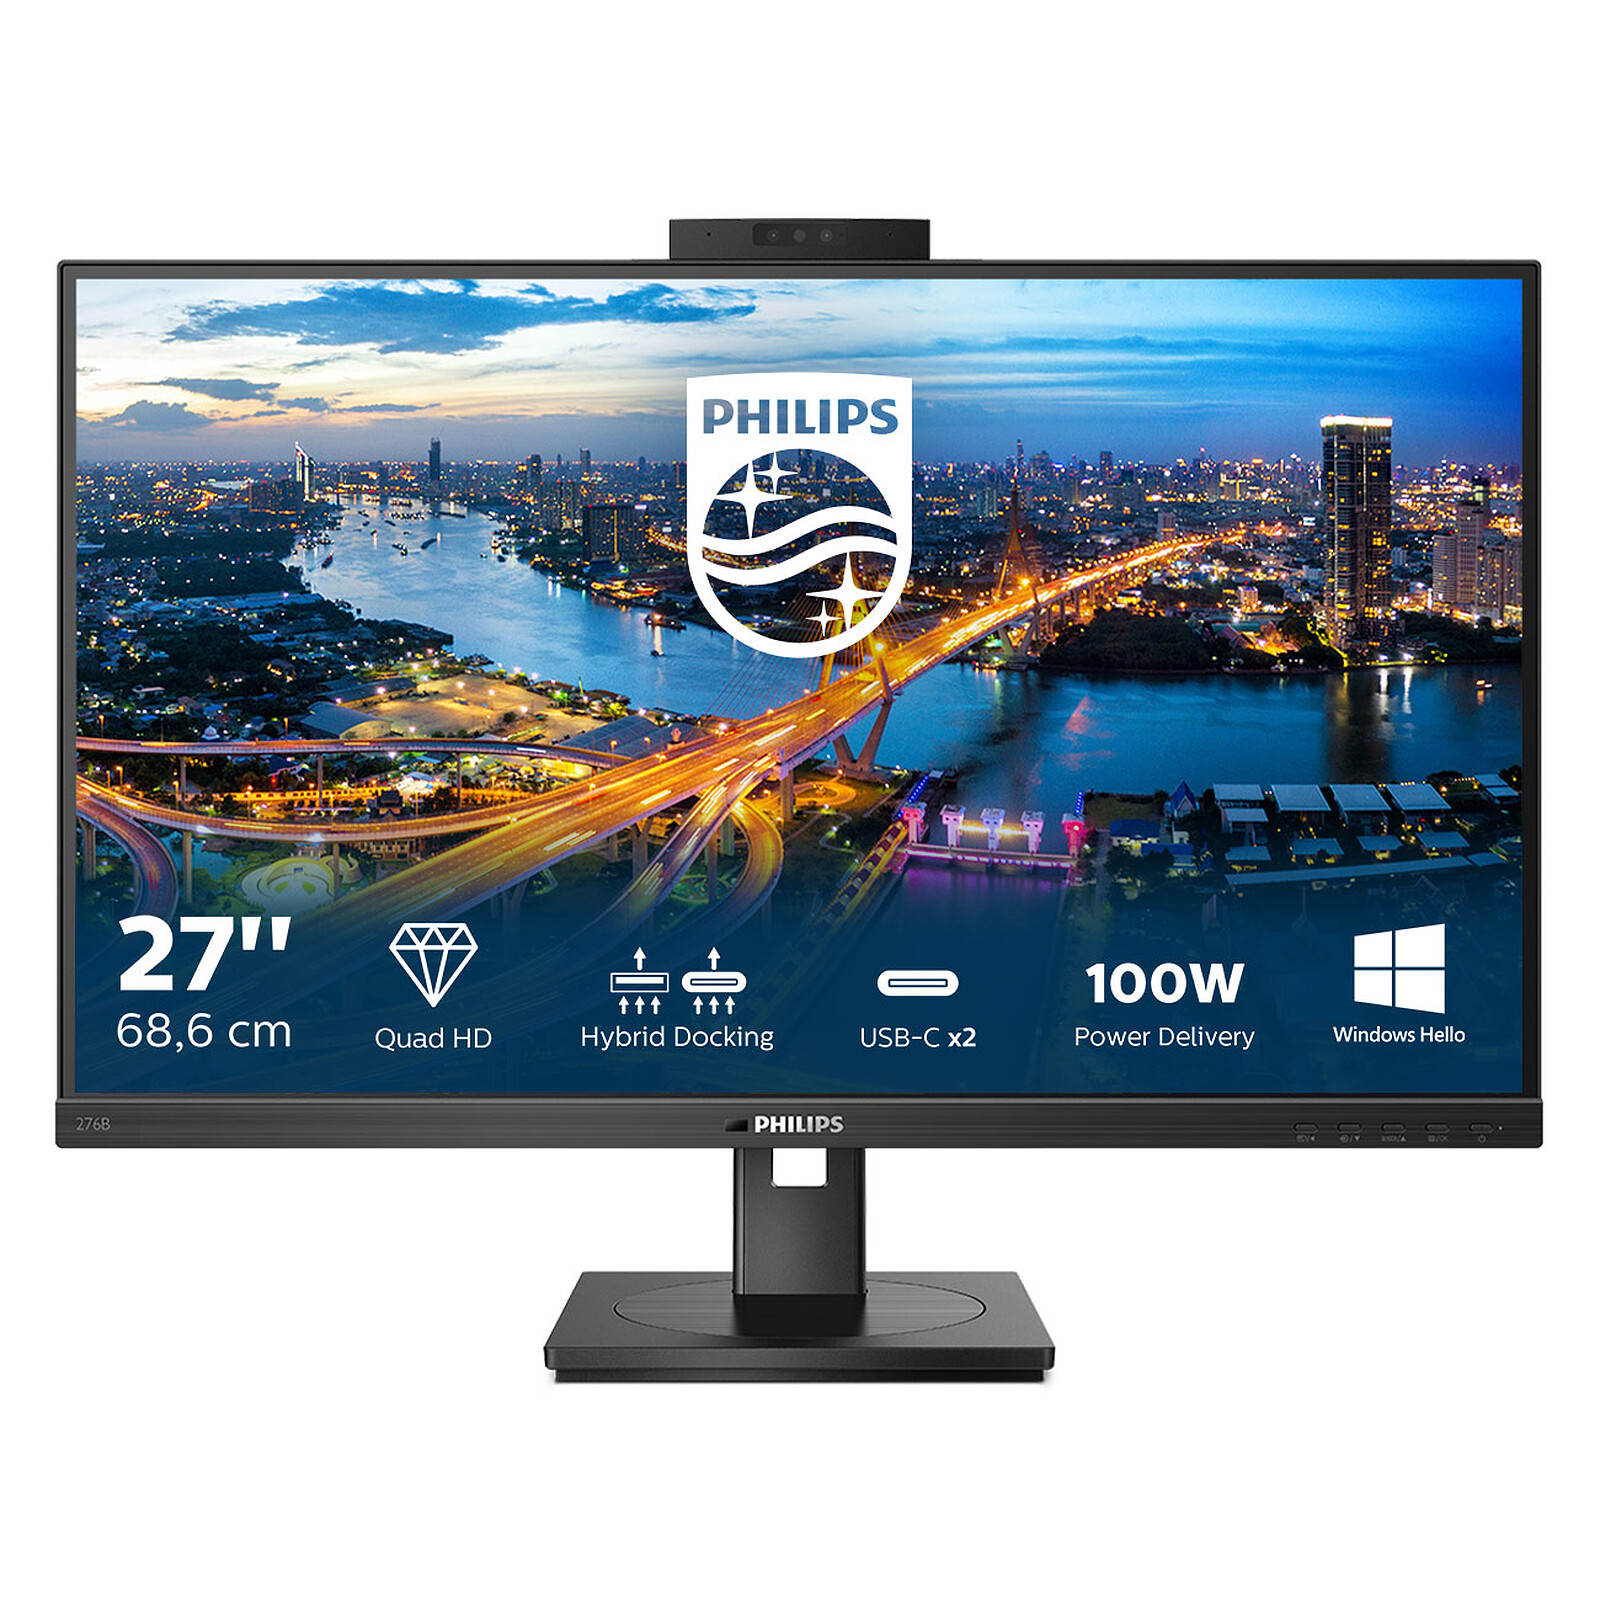 can i use my philips webcam on a new computer?